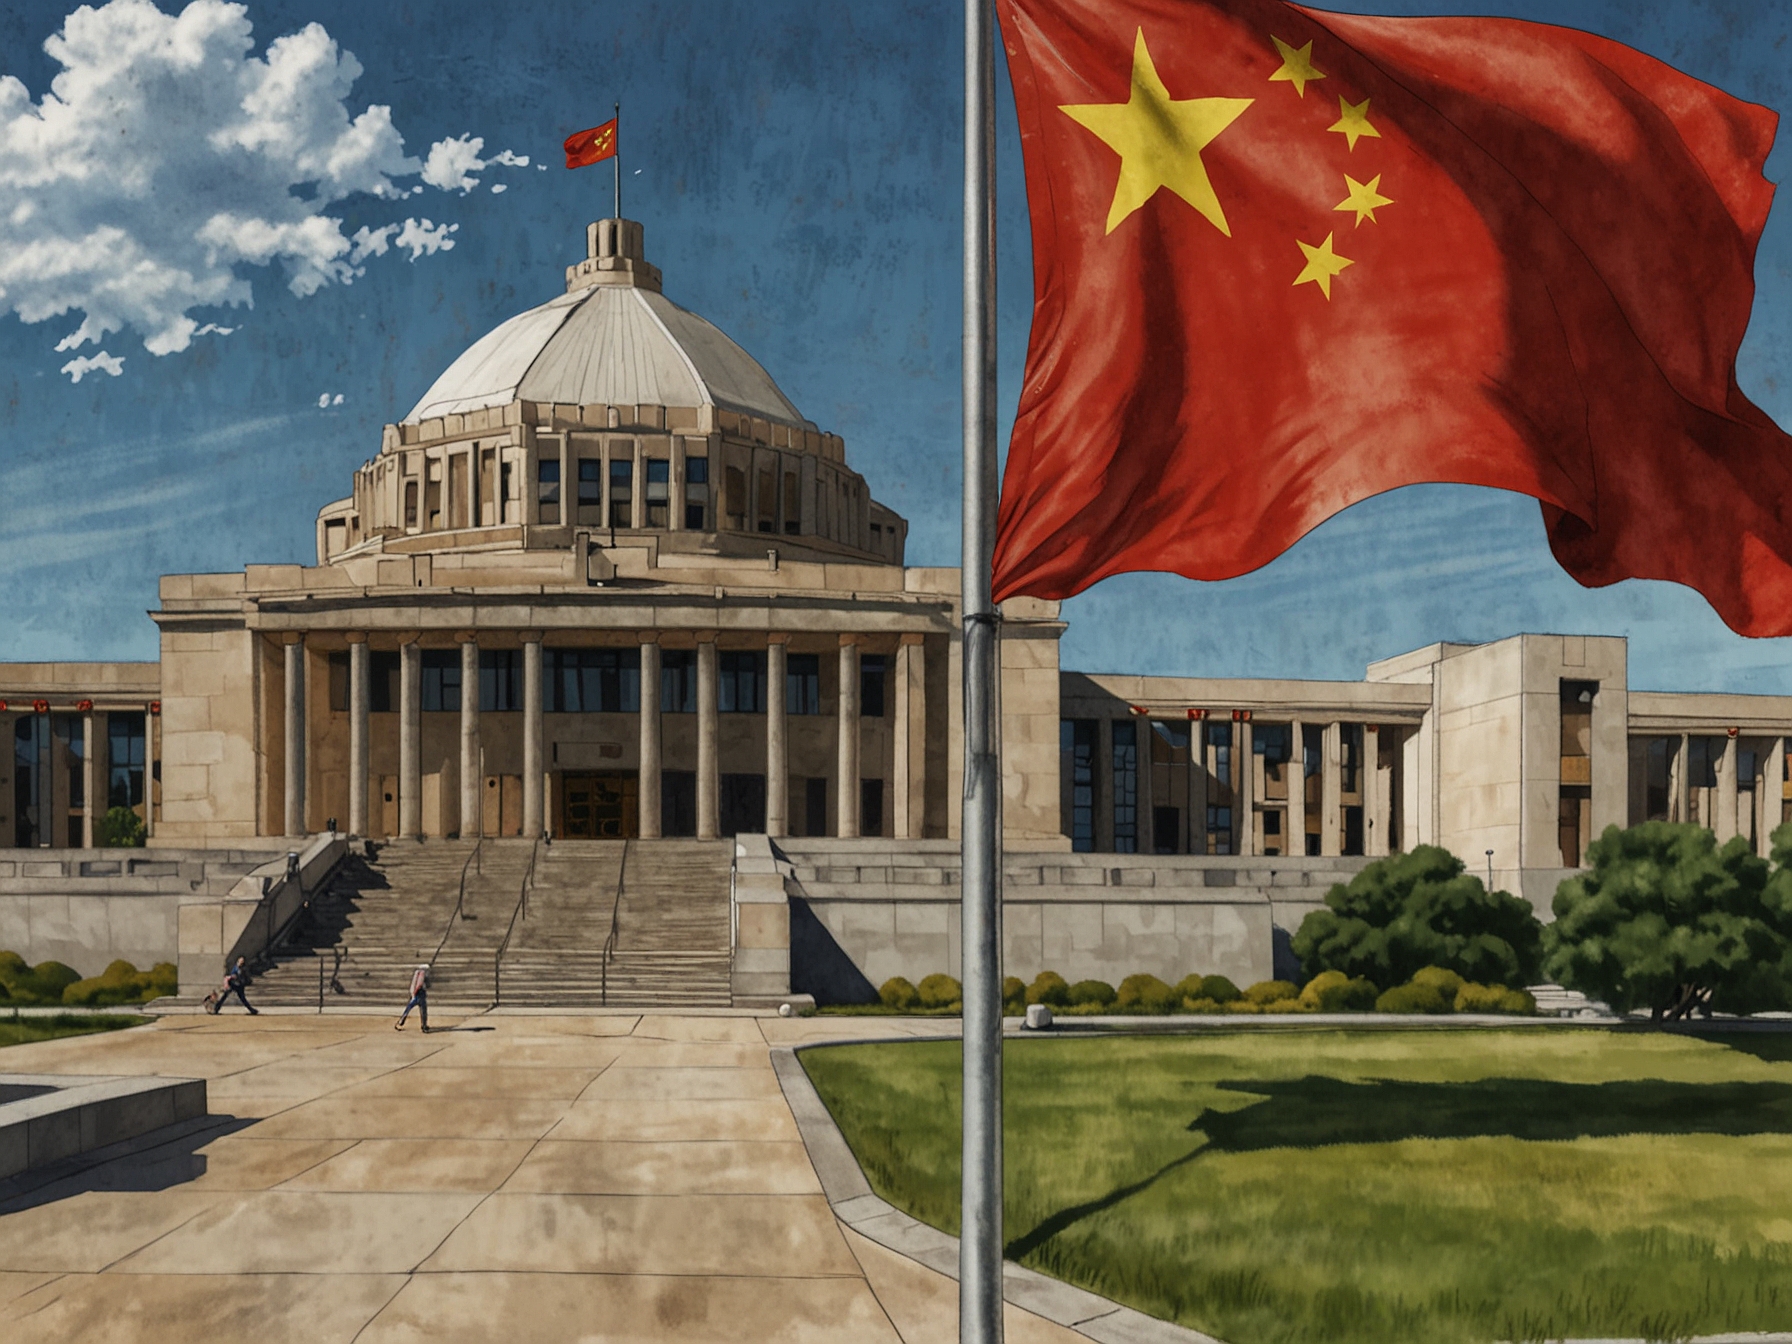 An illustration depicting the Chinese flag overshadowing Australia's Parliament House, symbolizing China's influence in Australia's political landscape.